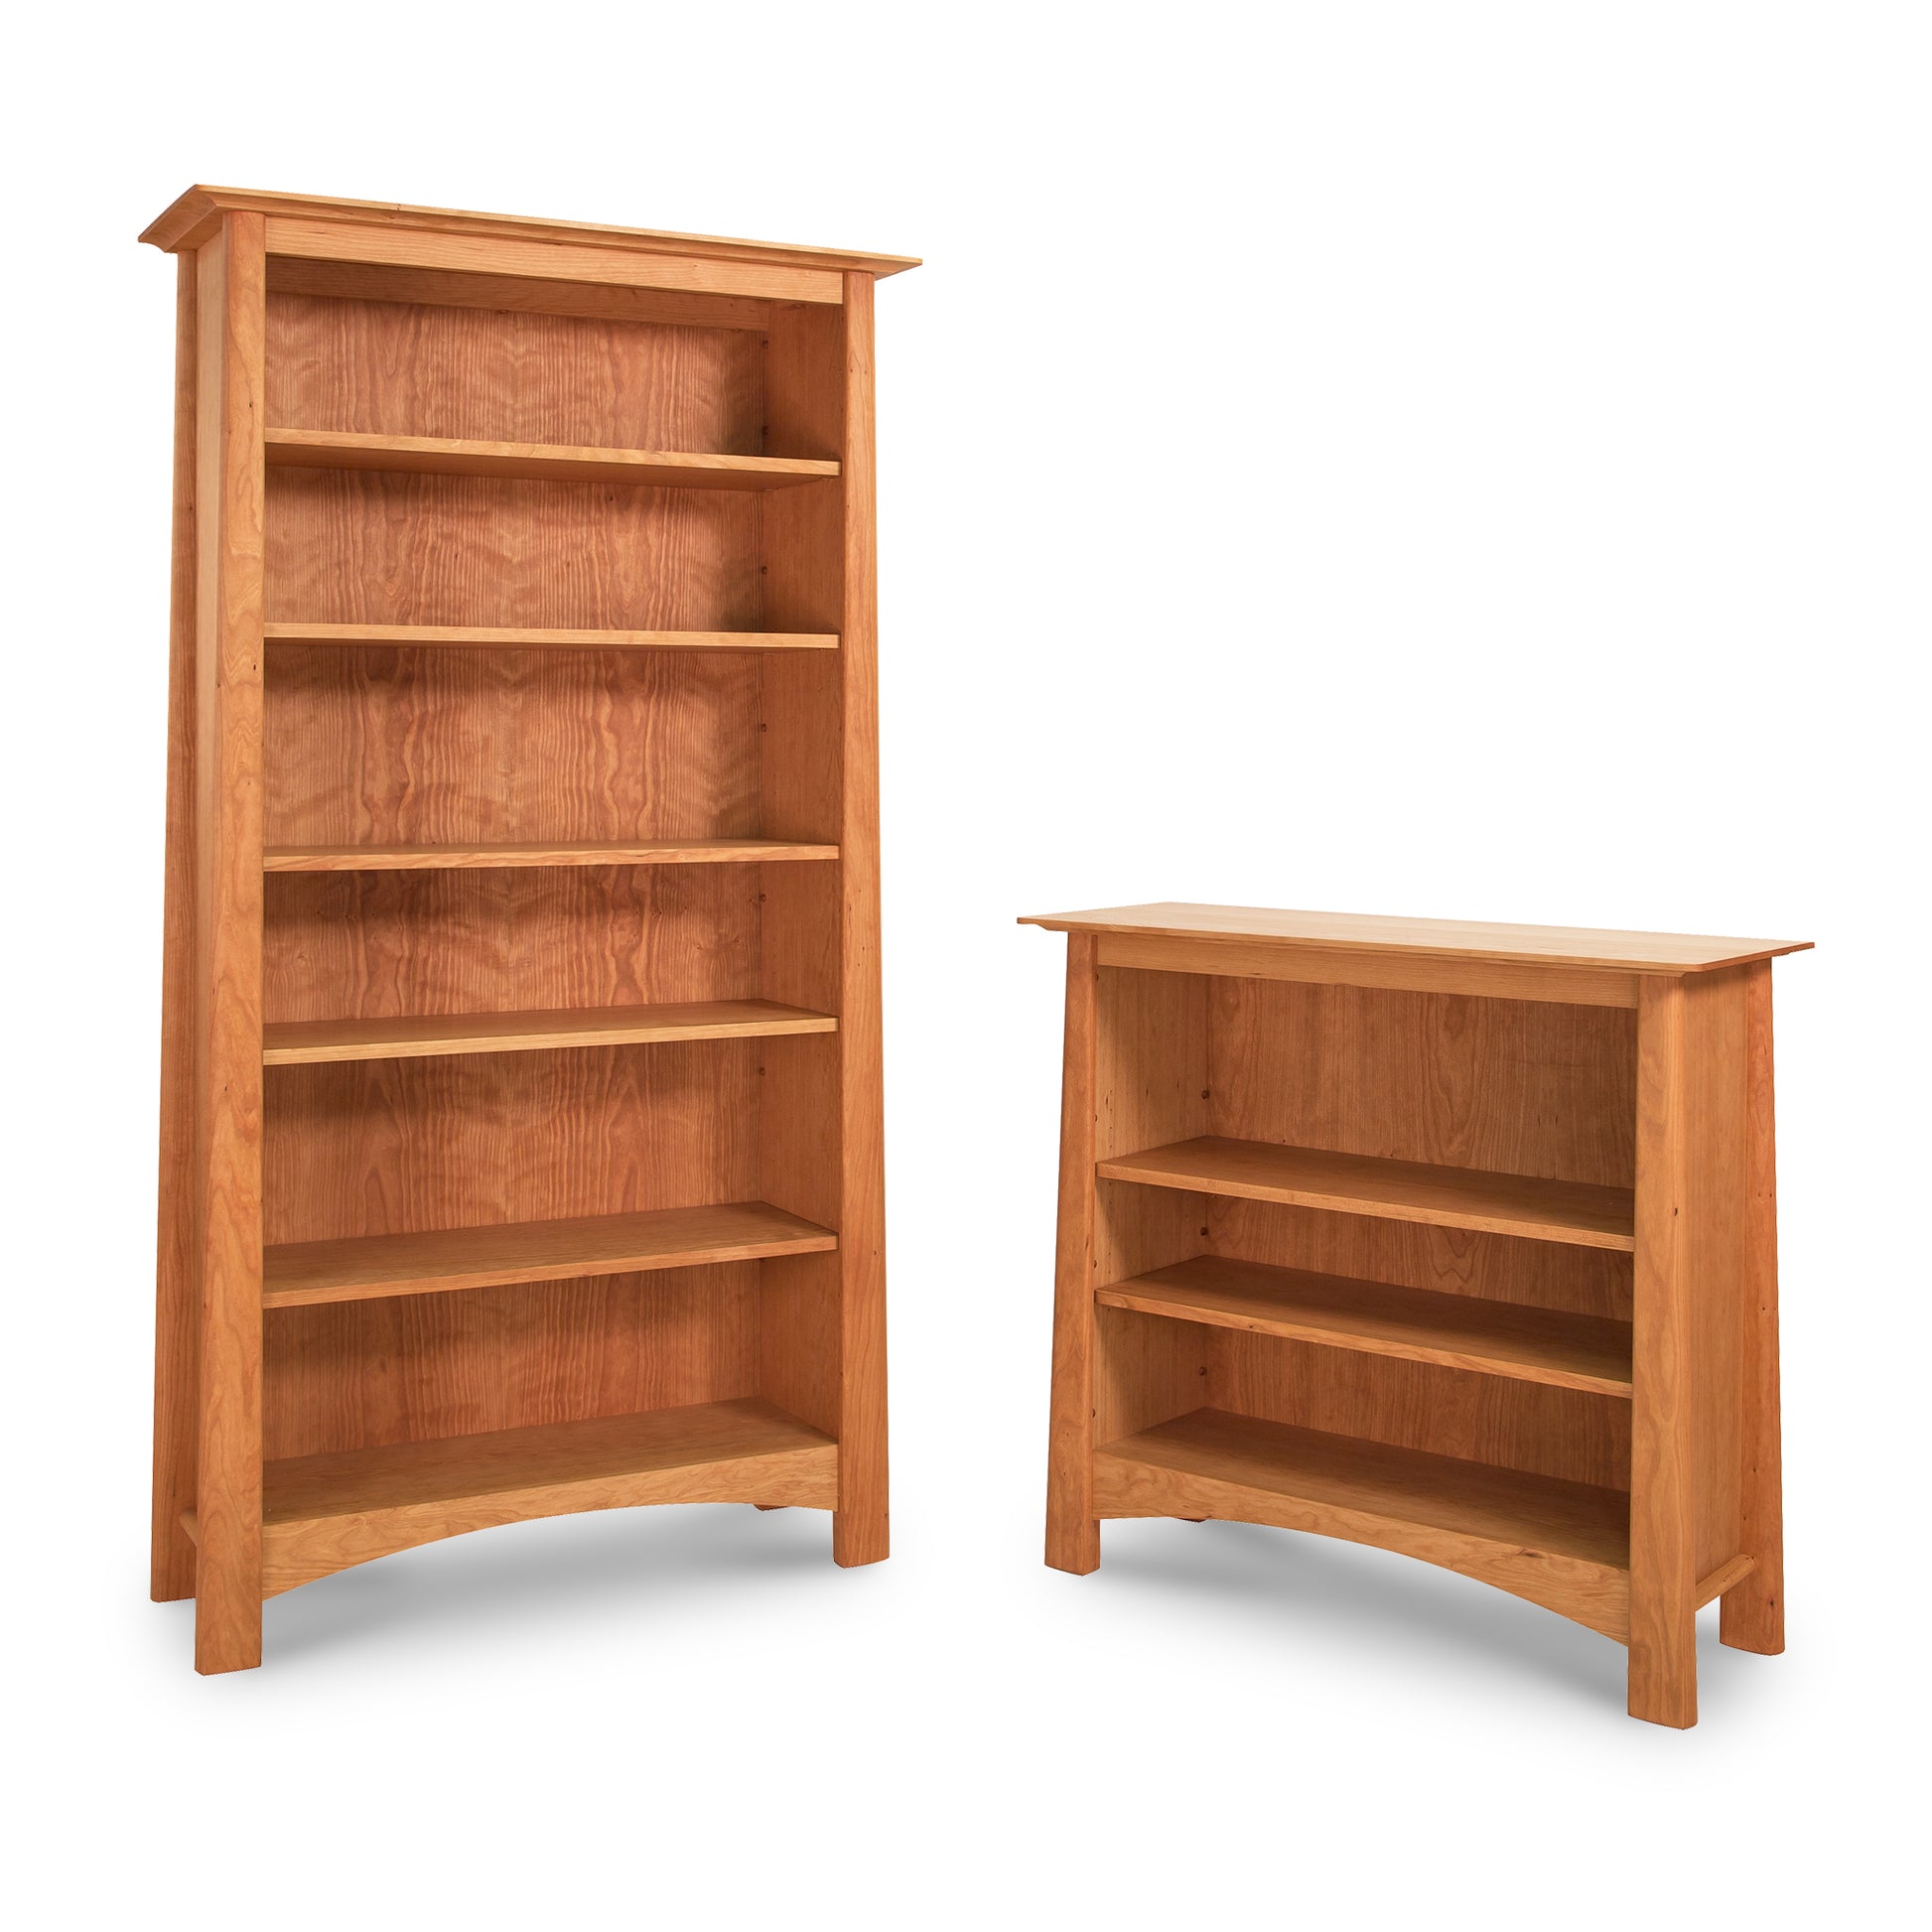 Two empty Maple Corner Woodworks Cherry Moon Bookcases of different sizes, crafted from sustainably harvested hardwoods, isolated on a white background.